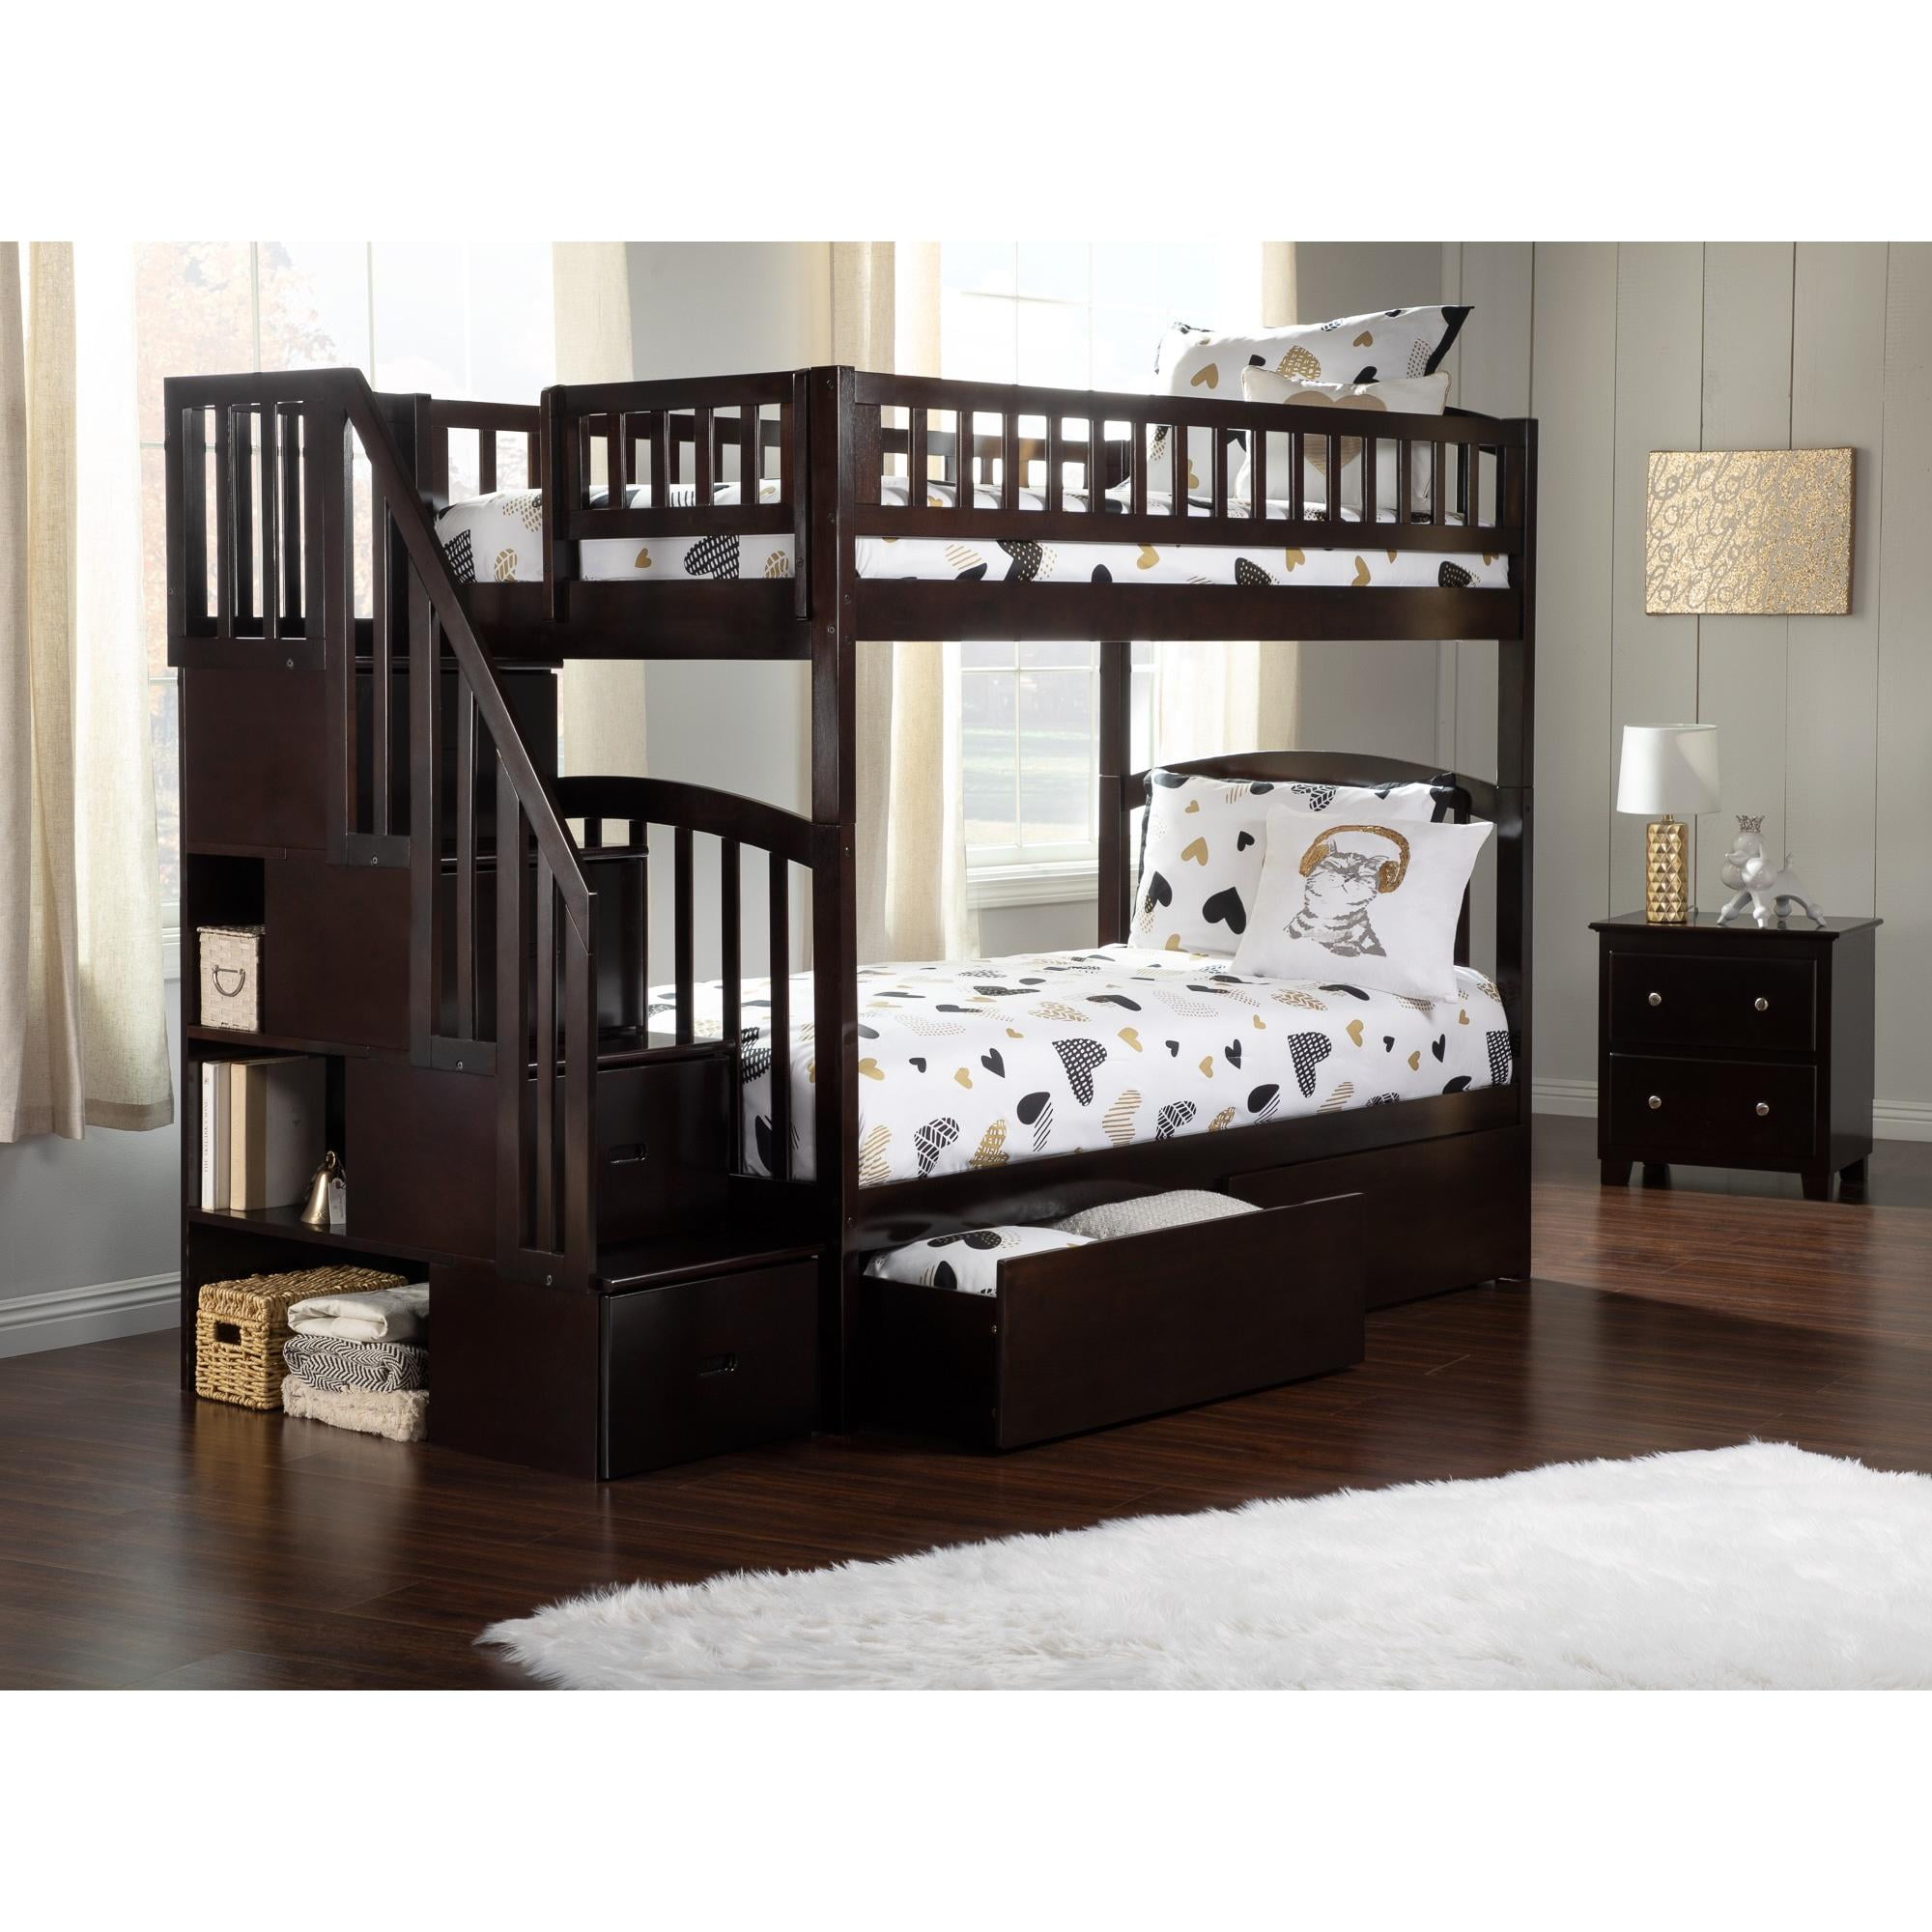 Ab65641 Westbrook Staircase Twin Over Twin Bunk Bed With 2 Urban Drawers, Espresso